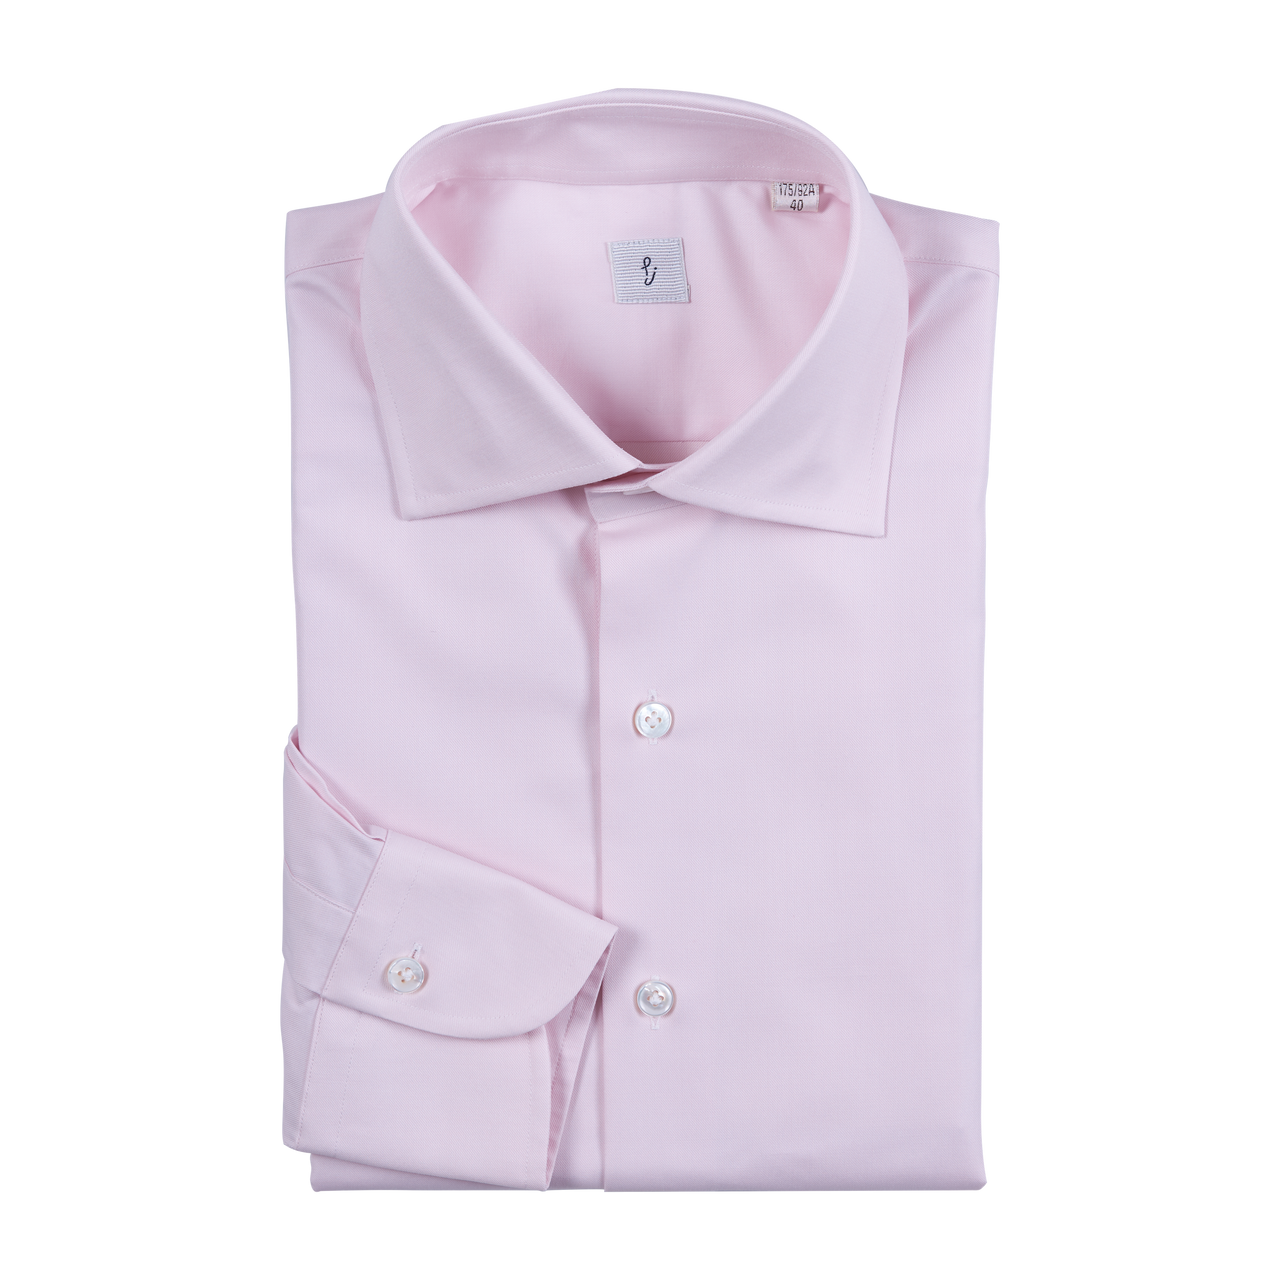 P. Johnson Shirt in Pale Pink Cotton Twill with Spread Collar